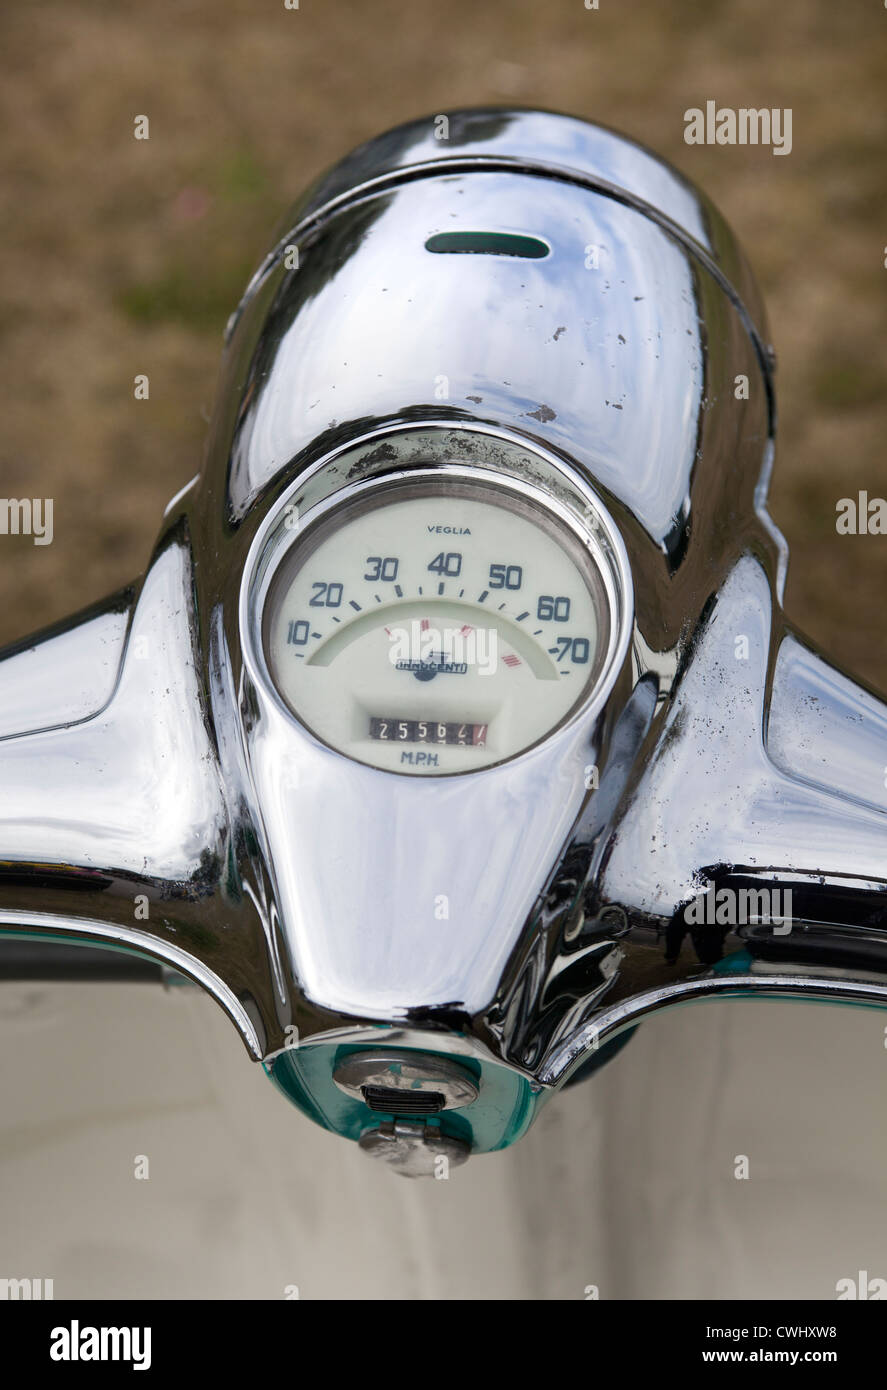 Closeup of Speedometer on a Classic Vespa Scooter Stock Photo